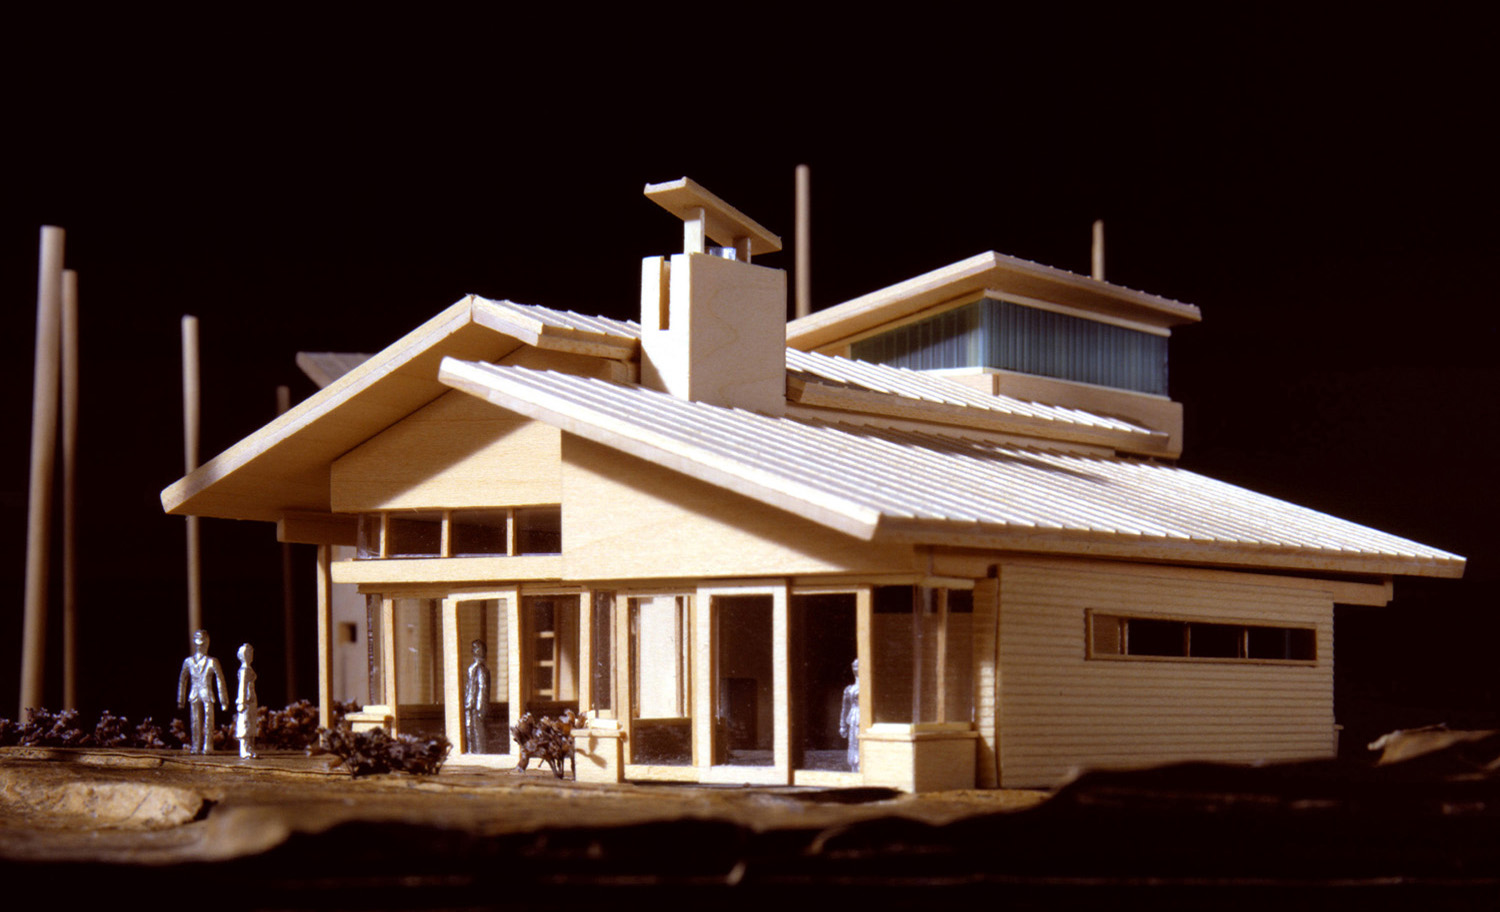   CARLYON RESIDENCE . Traverse City, MI  &nbsp;    This was an initial, more ambitious study for the home that was  eventually built  (see residential projects). &nbsp;  The overall approach to site, view and program layout was maintained in the fina